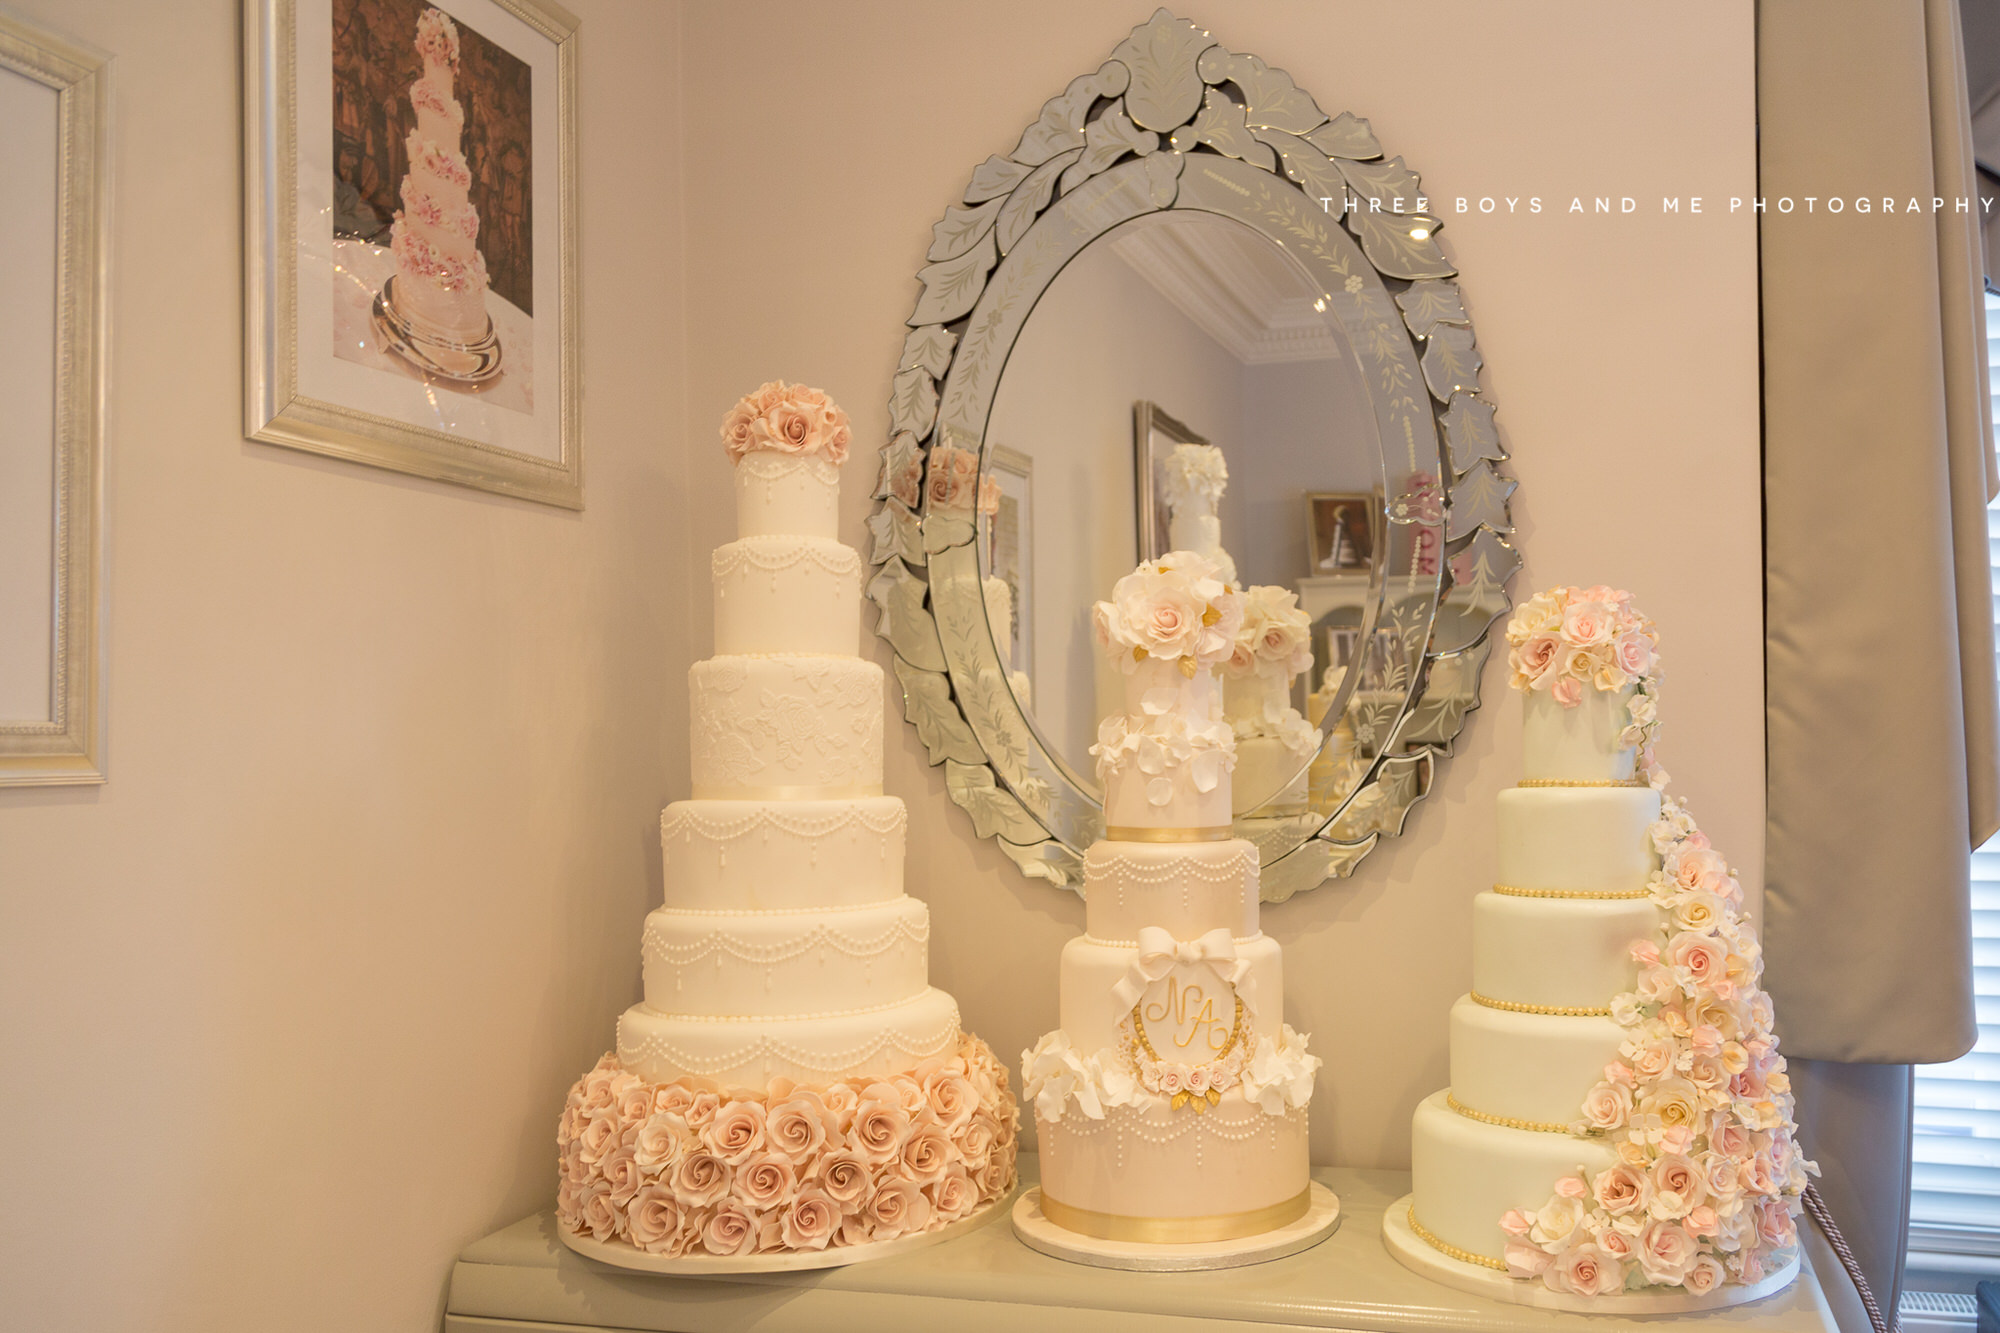 Hall of cakes product photography by 3 Boys & Me Photography Bexley 